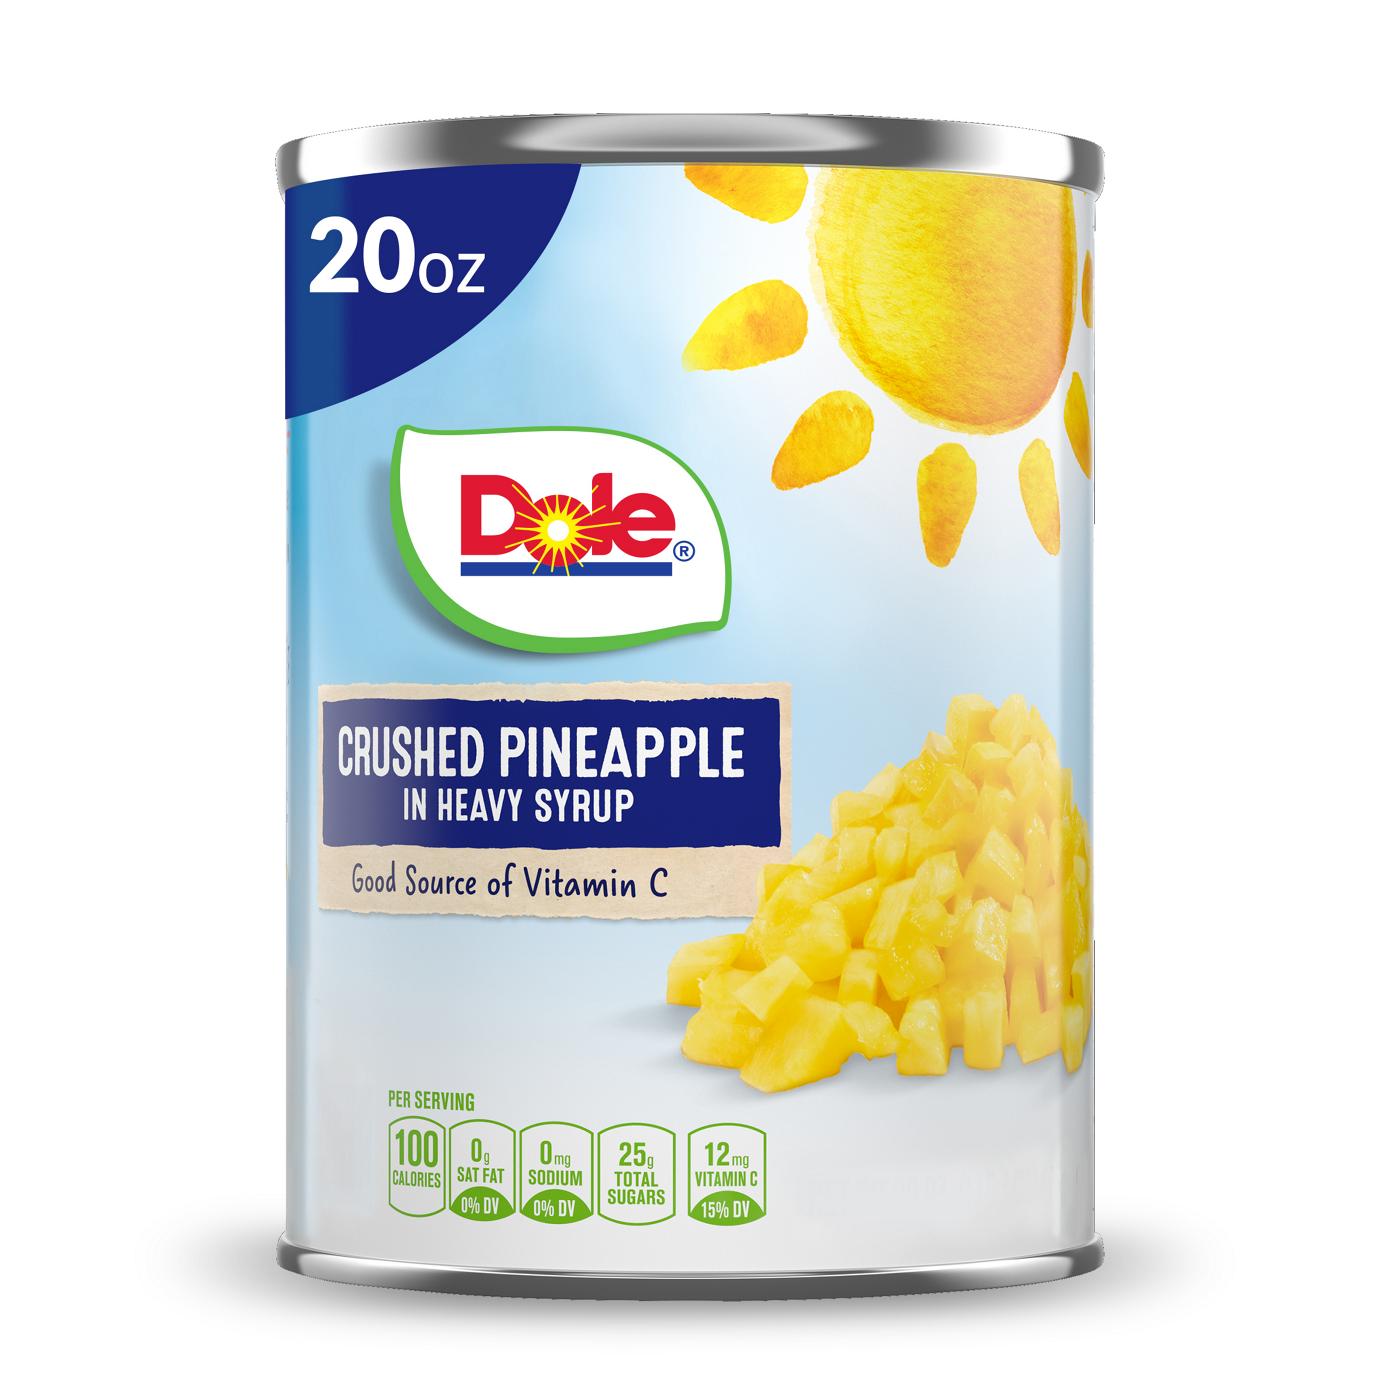 Dole Crushed Pineapple in Heavy Syrup; image 1 of 5